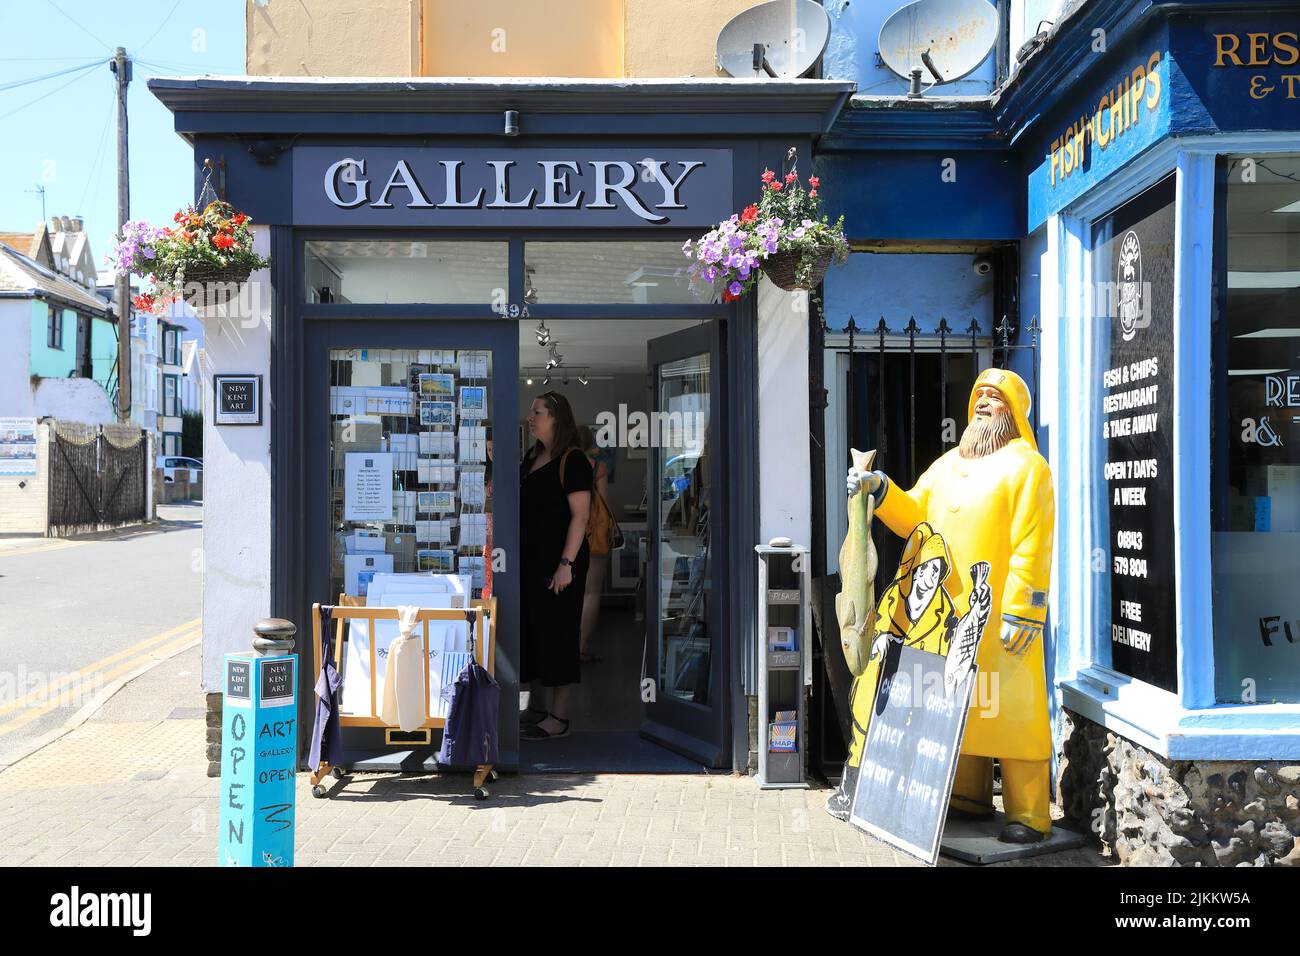 New Kent Art Gallery and Seafarer fish and chips, in the pretty old town of Broadstairs, on the Isle of Thanet, in Kent, UK Stock Photo